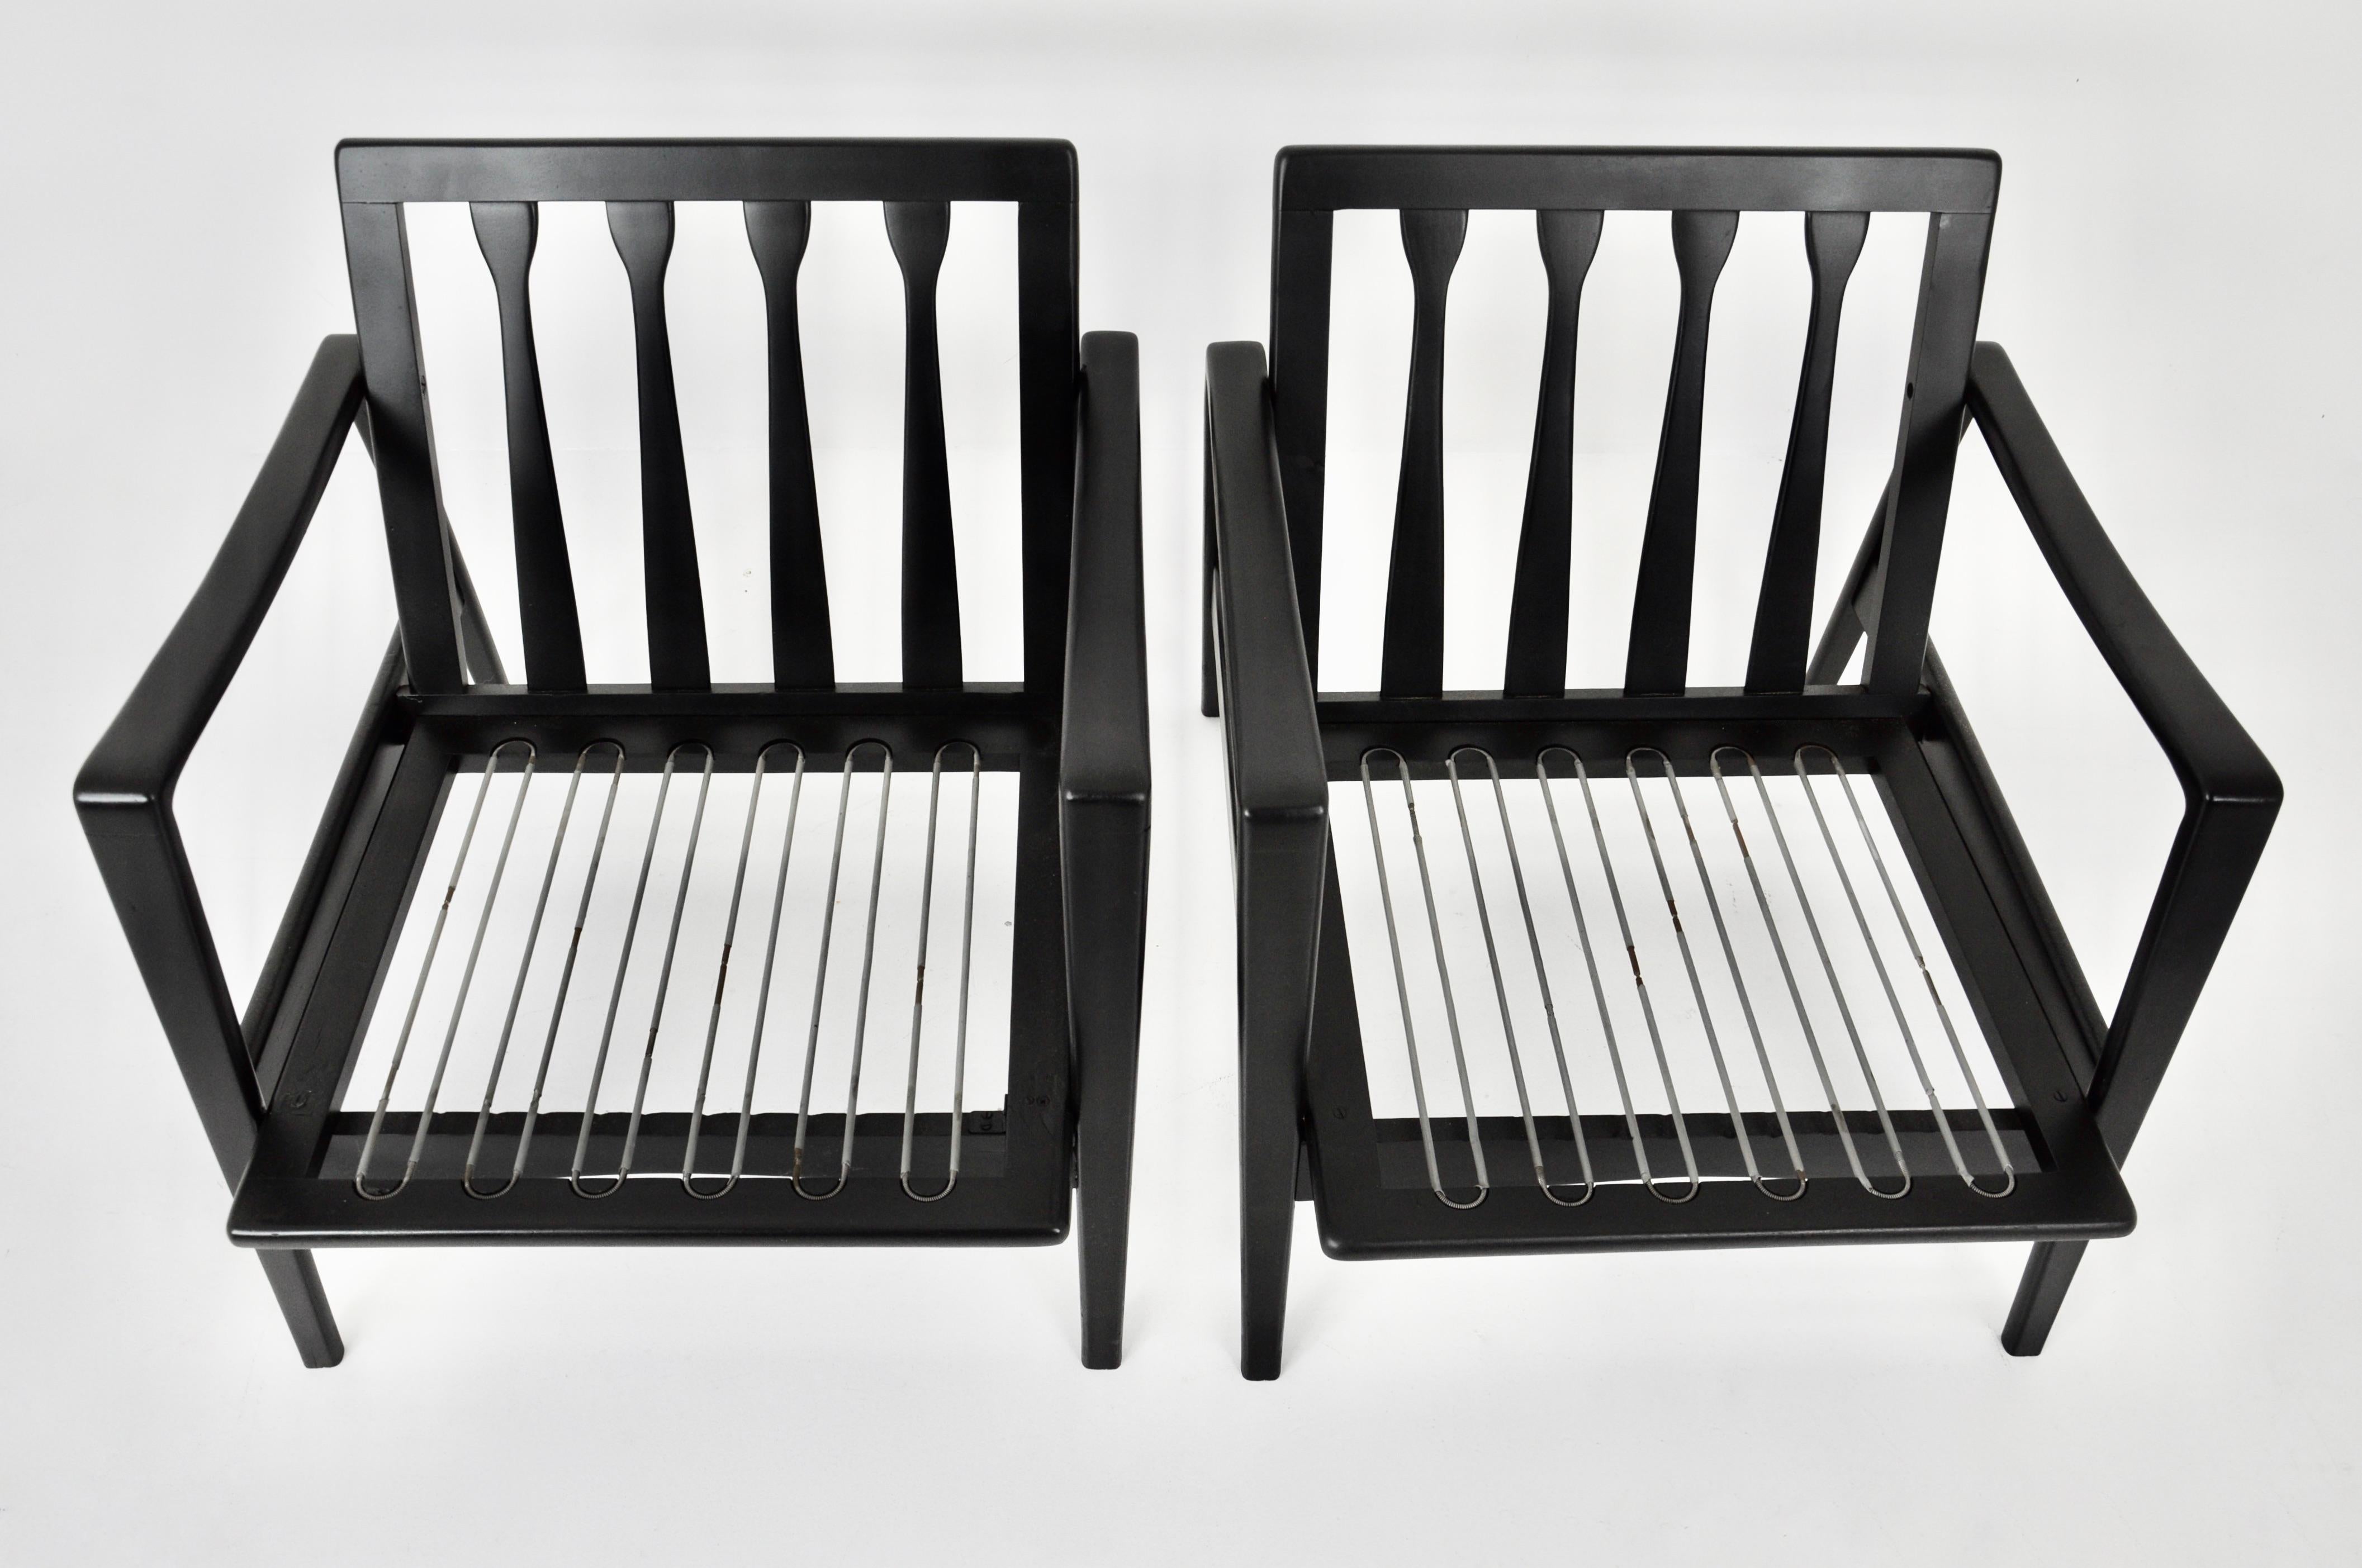 Pair of Scandinavian Lounge Chairs by Arne Wahl Iversen for Komfort, 1950s For Sale 2